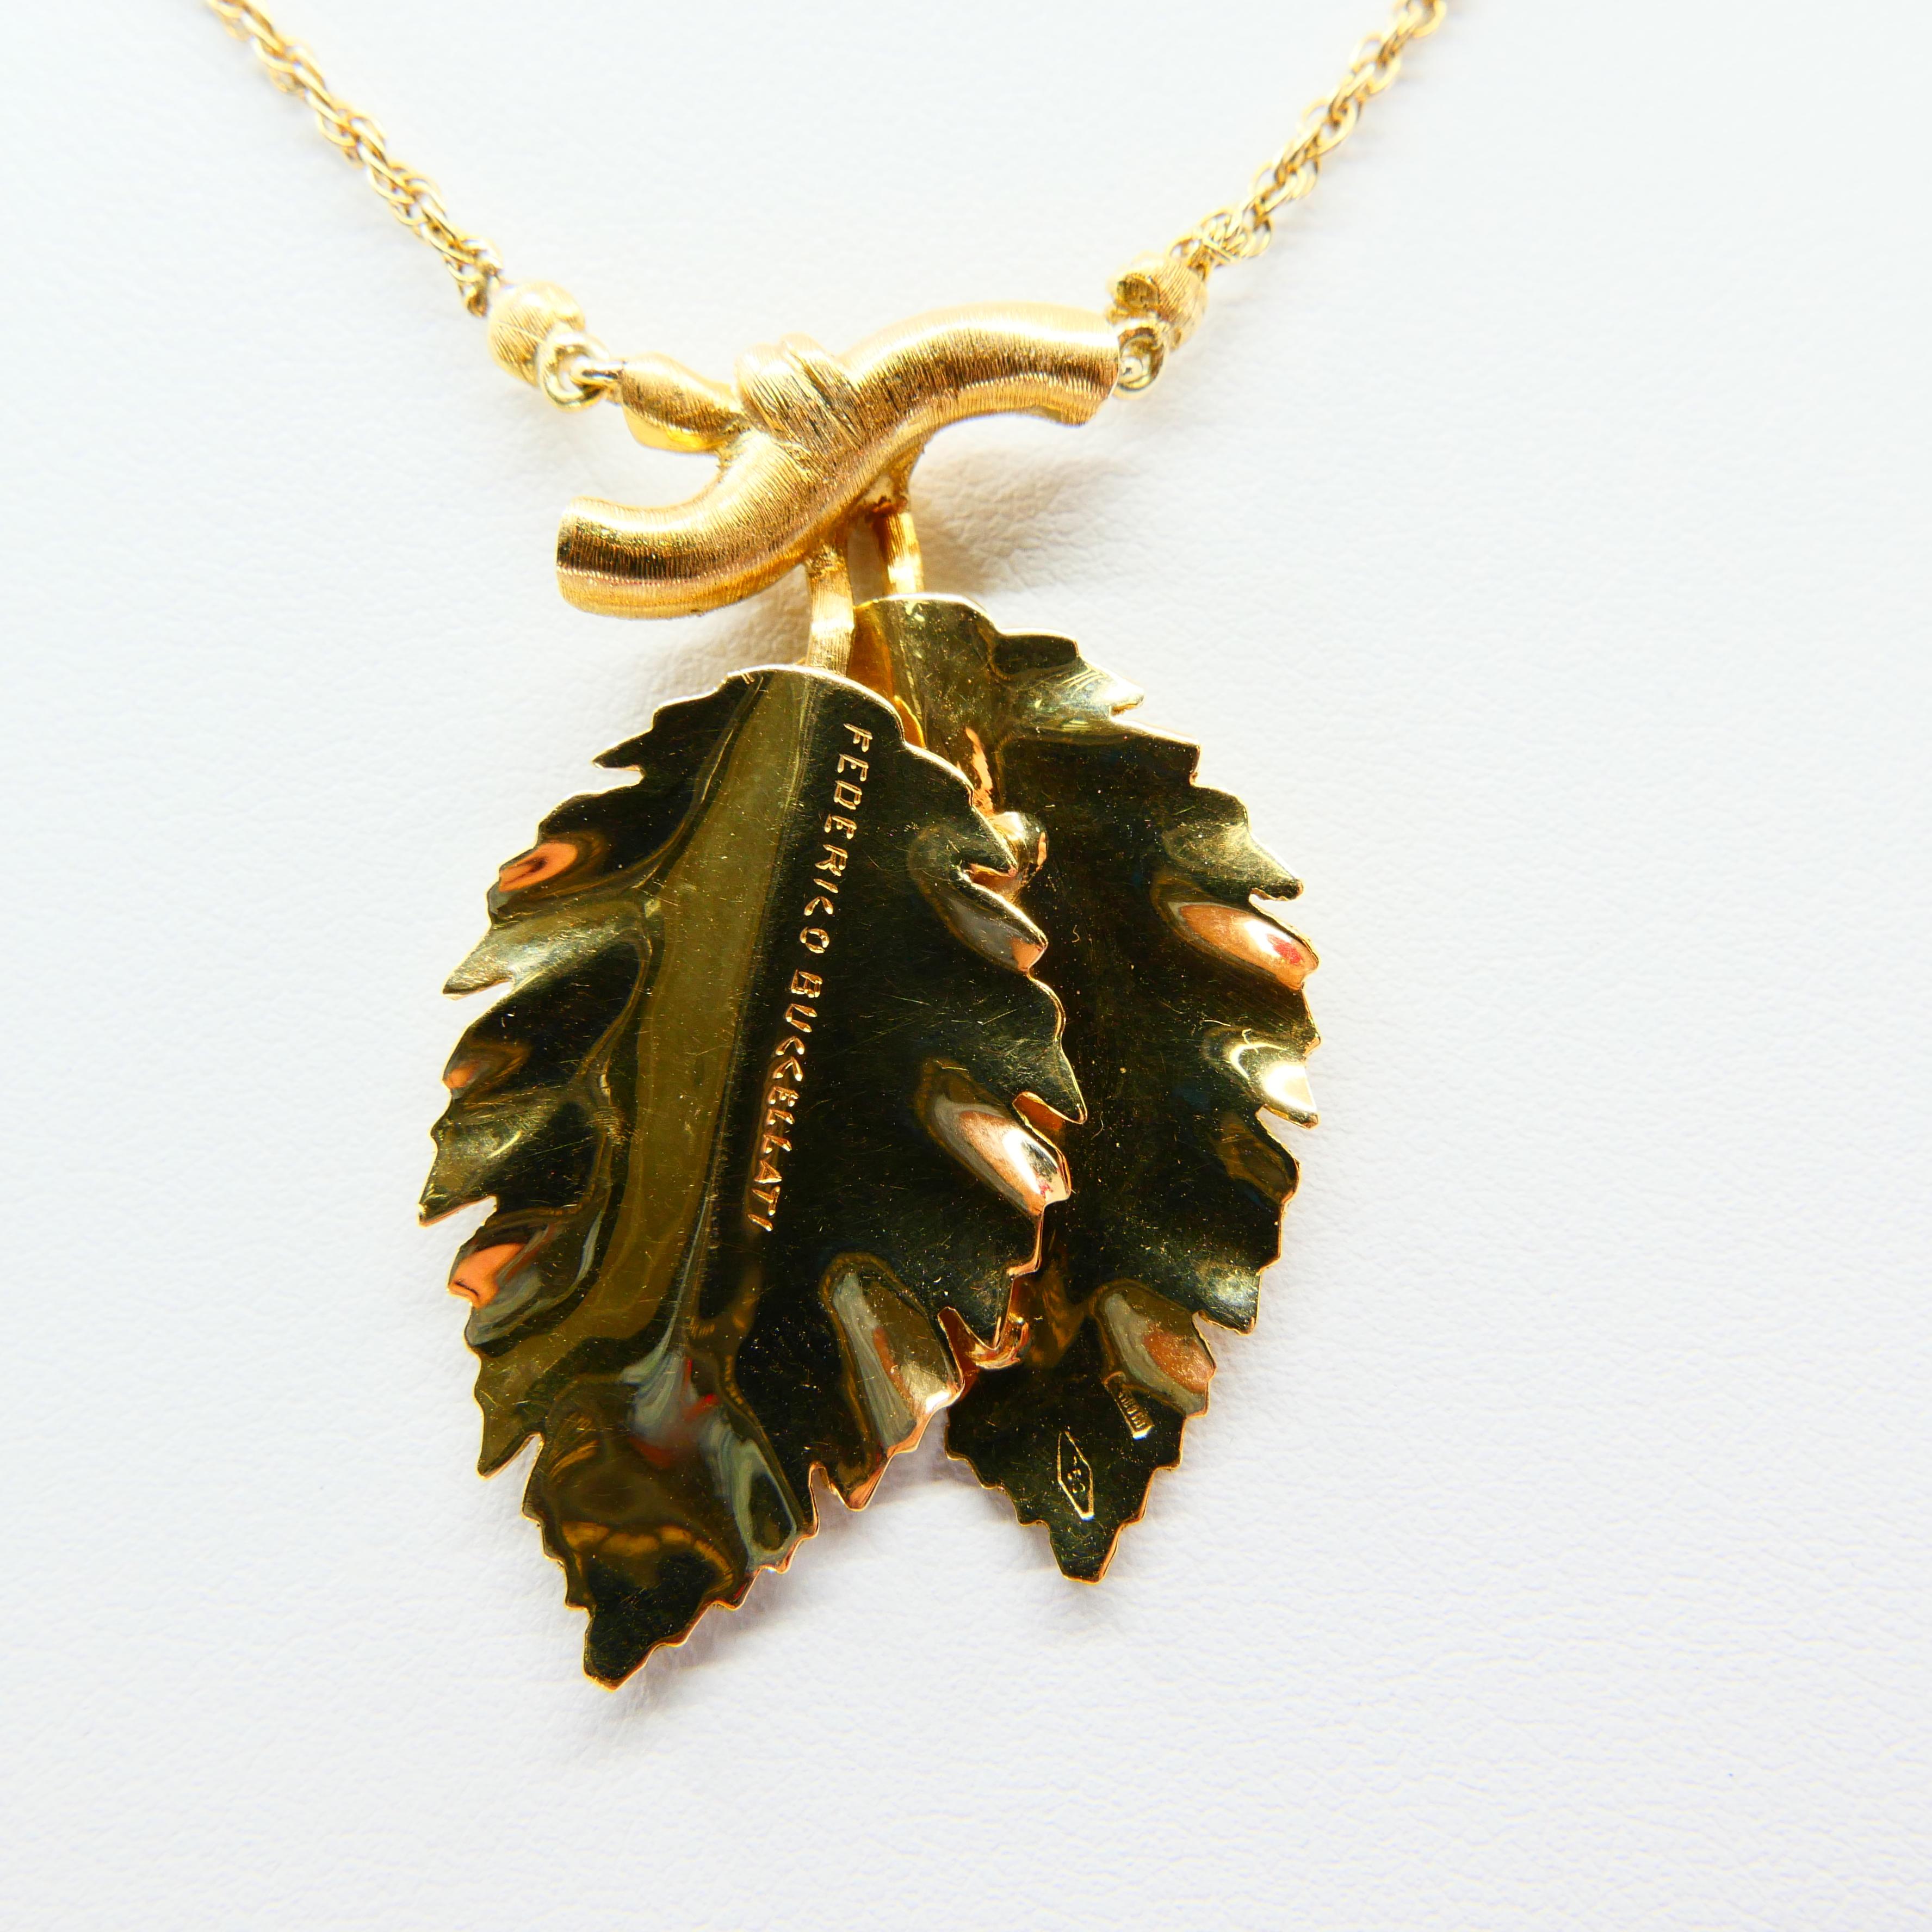 Buccellati, Federico 18K Yellow Gold Leaves and Twigs Pendant Drop Necklace  5